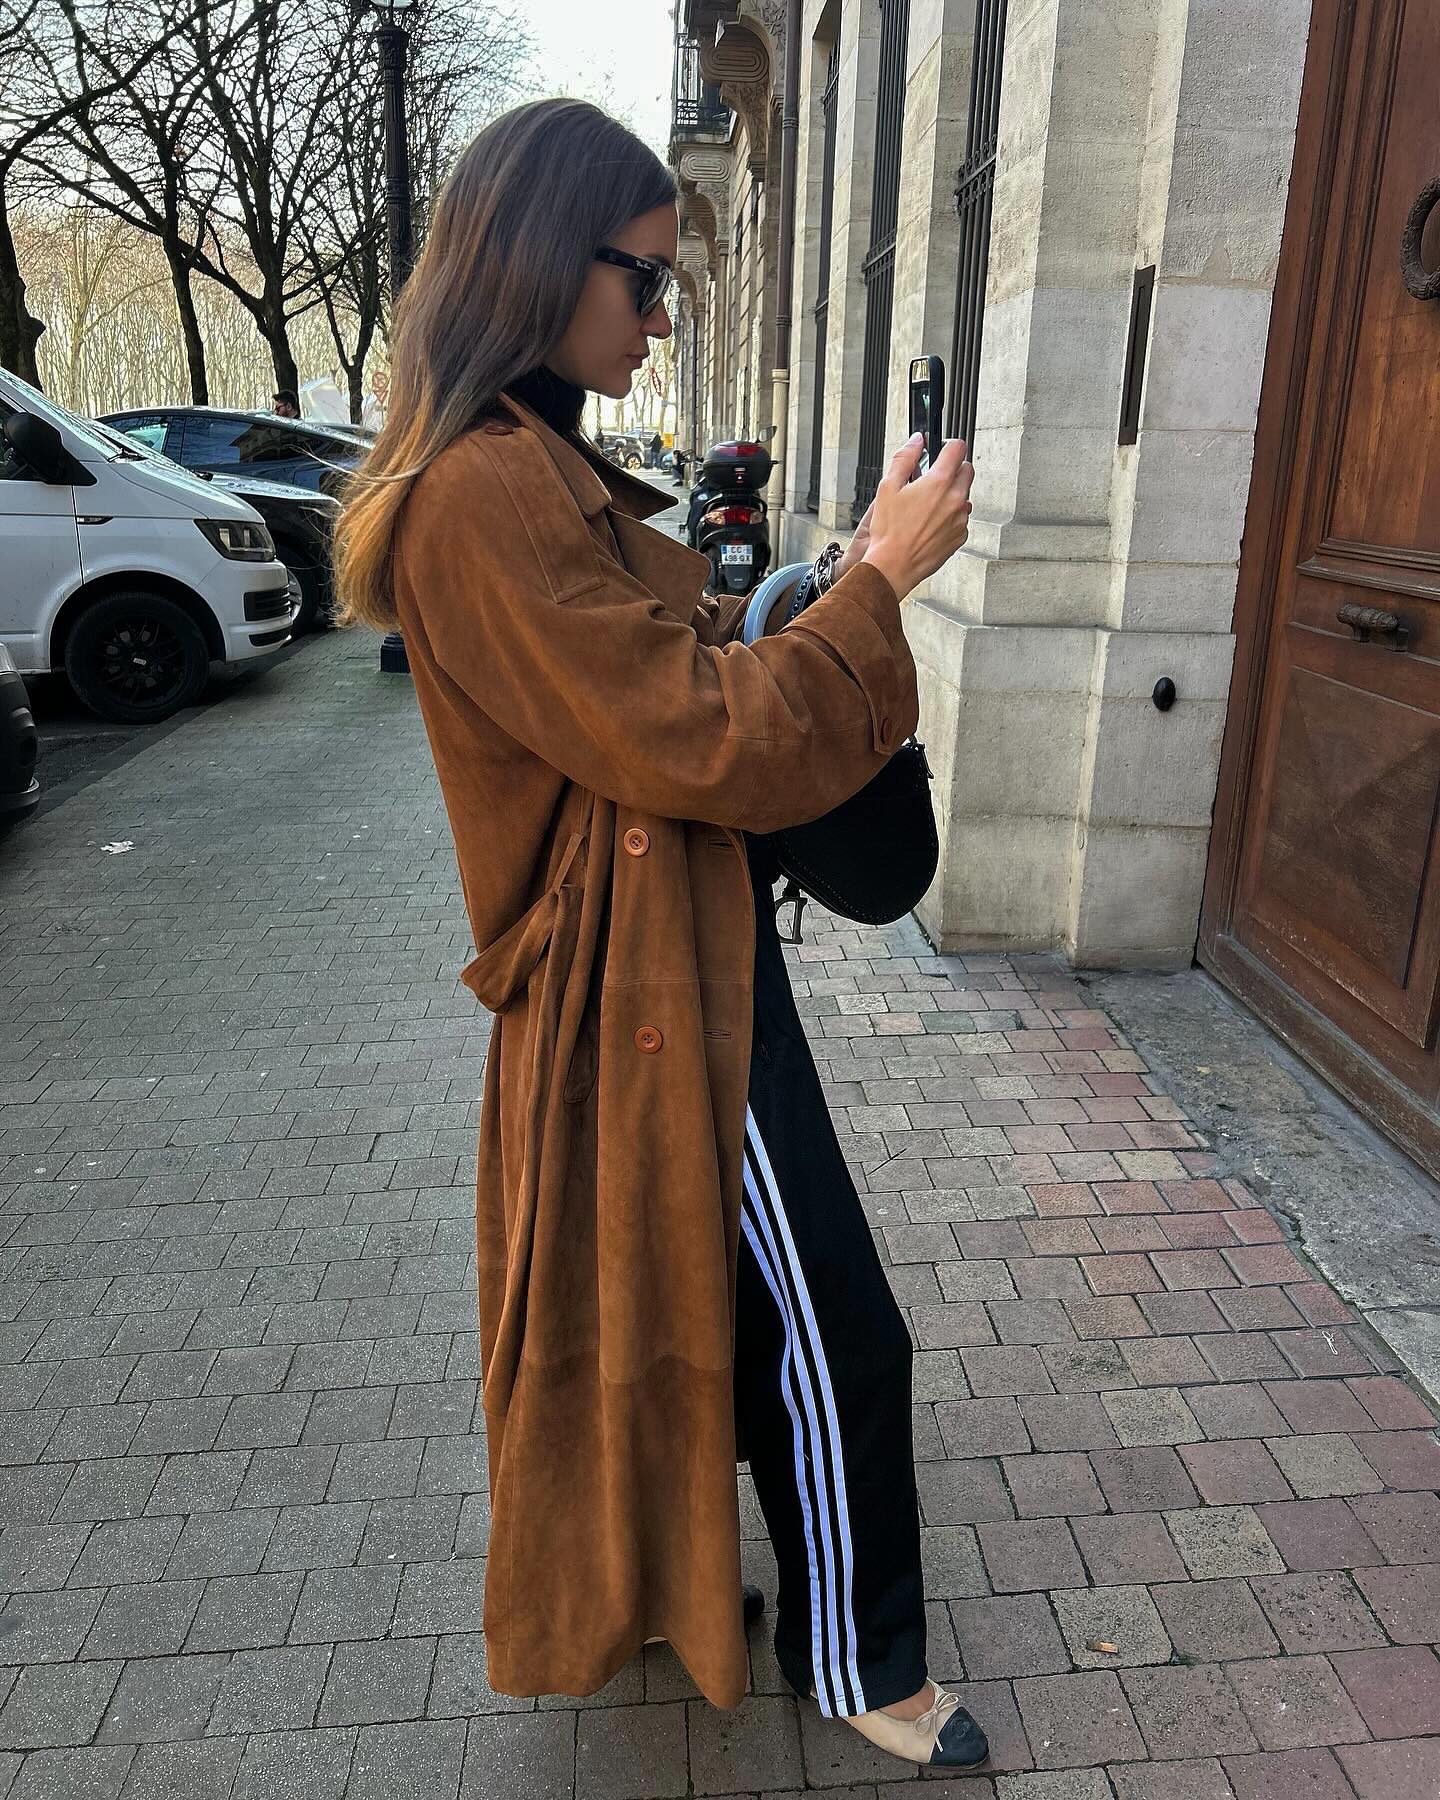 Parisian fashion influencer Anne Laure Mais takes a photo with her cellphone while wearing a long camel suede trench coat, Adidas track pants, and Chanel cap-toe ballet flats.